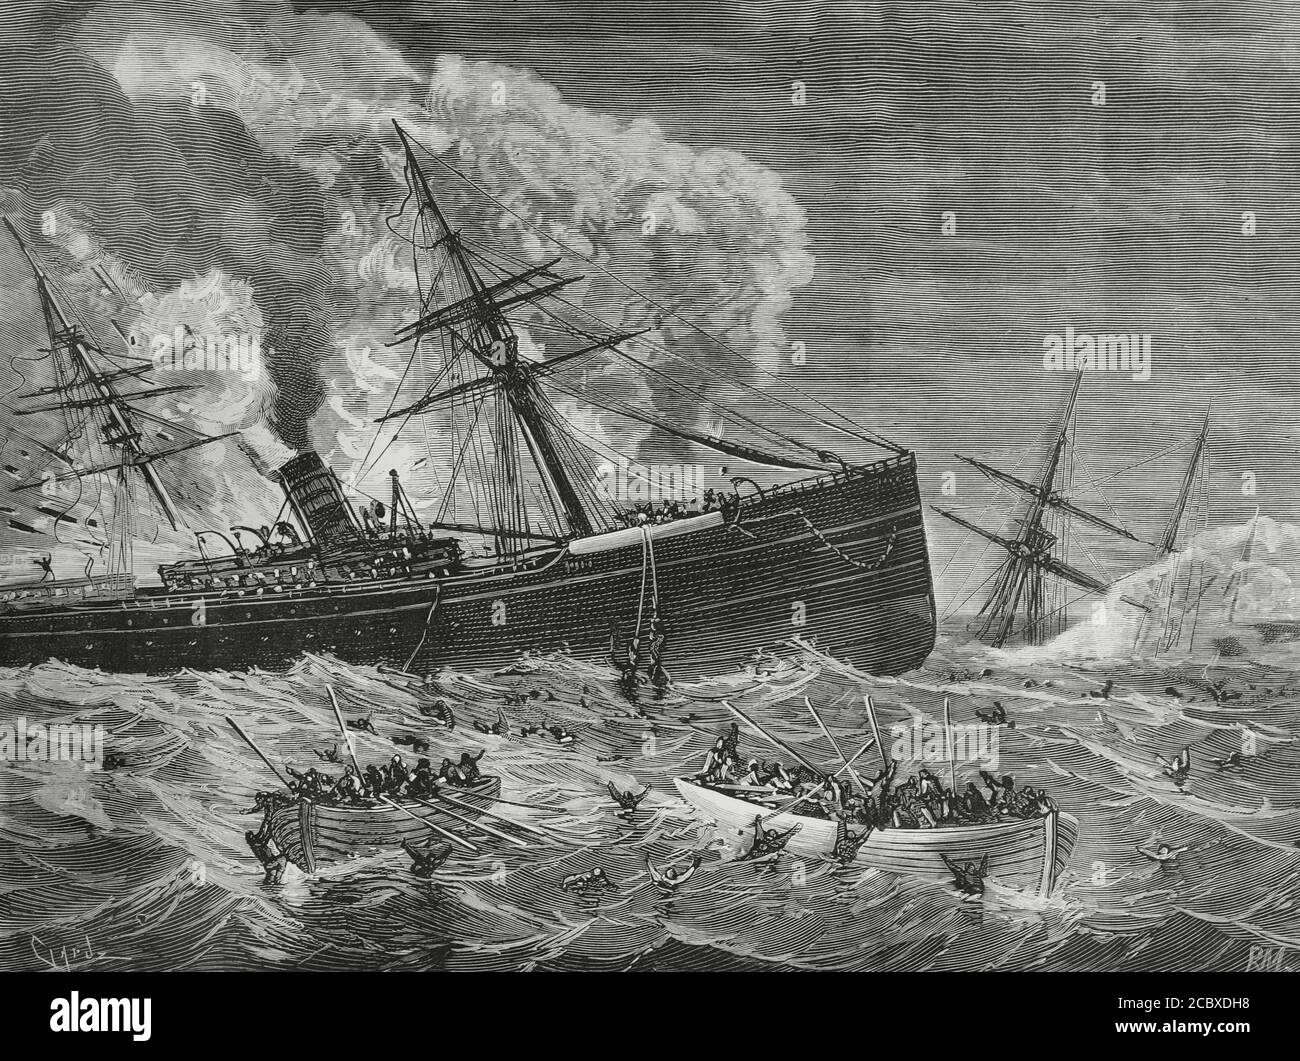 Shipwreck of the steamers León (Spanish) and Harelda (English) in the waters of the Bay of Biscay, at 2:00 a.m. on 7 January 1881, following a collision between the two ships. Maritime tragedy with a total of 23 missing. Illustration by Monleón, Engraving by Tomás Carlos Capuz (1834-1899). La Ilustracion Española y Americana, 1881. Stock Photo